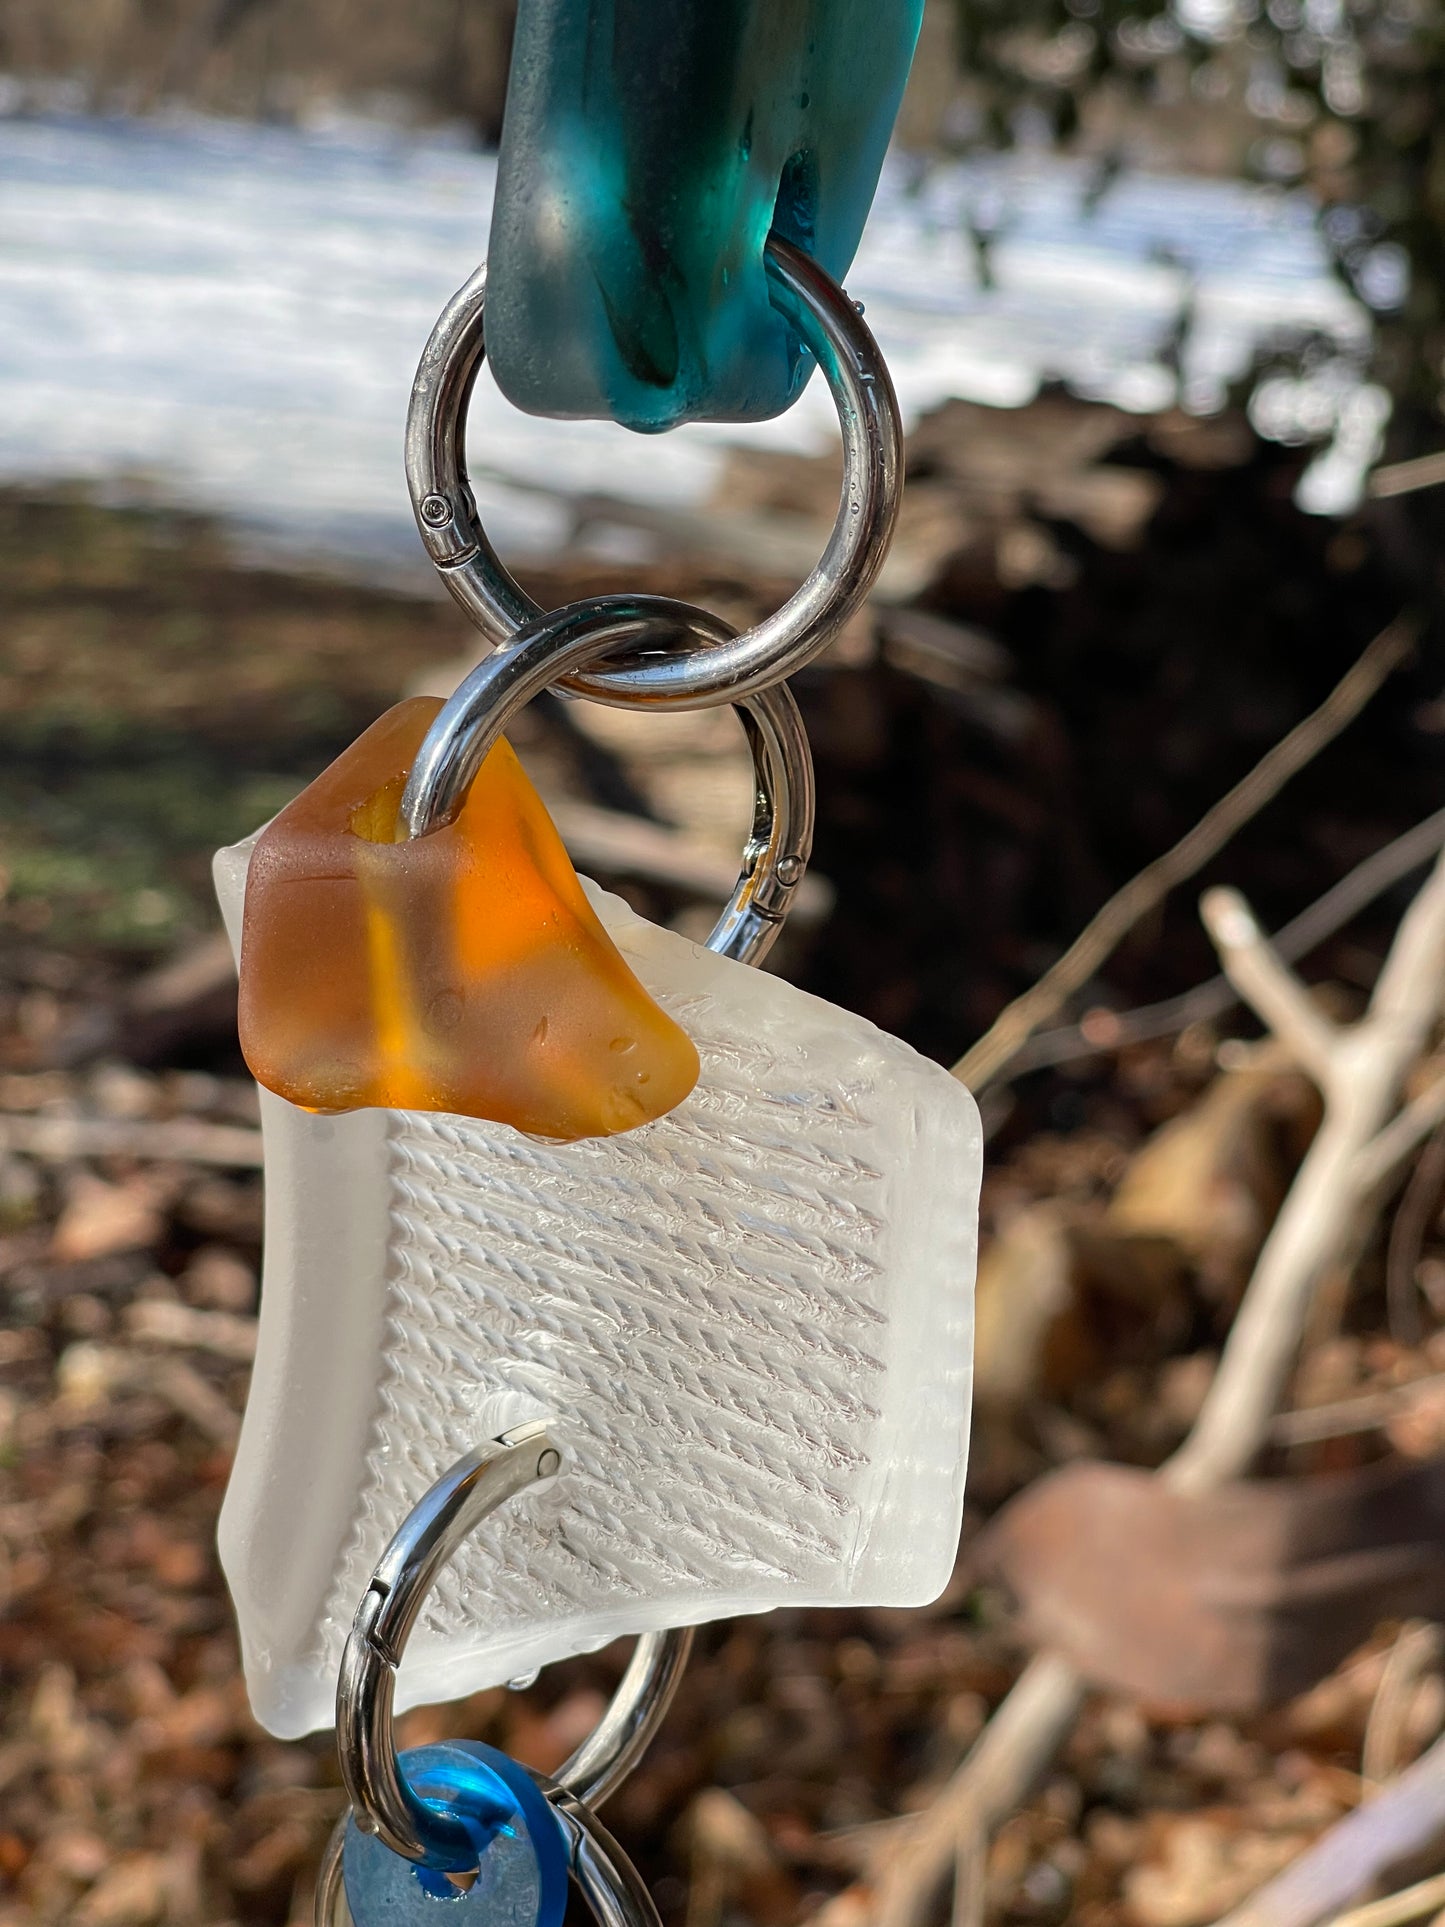 Chunky repurposed glass sun chain with a sweet bruise that glows warmly in sunlight